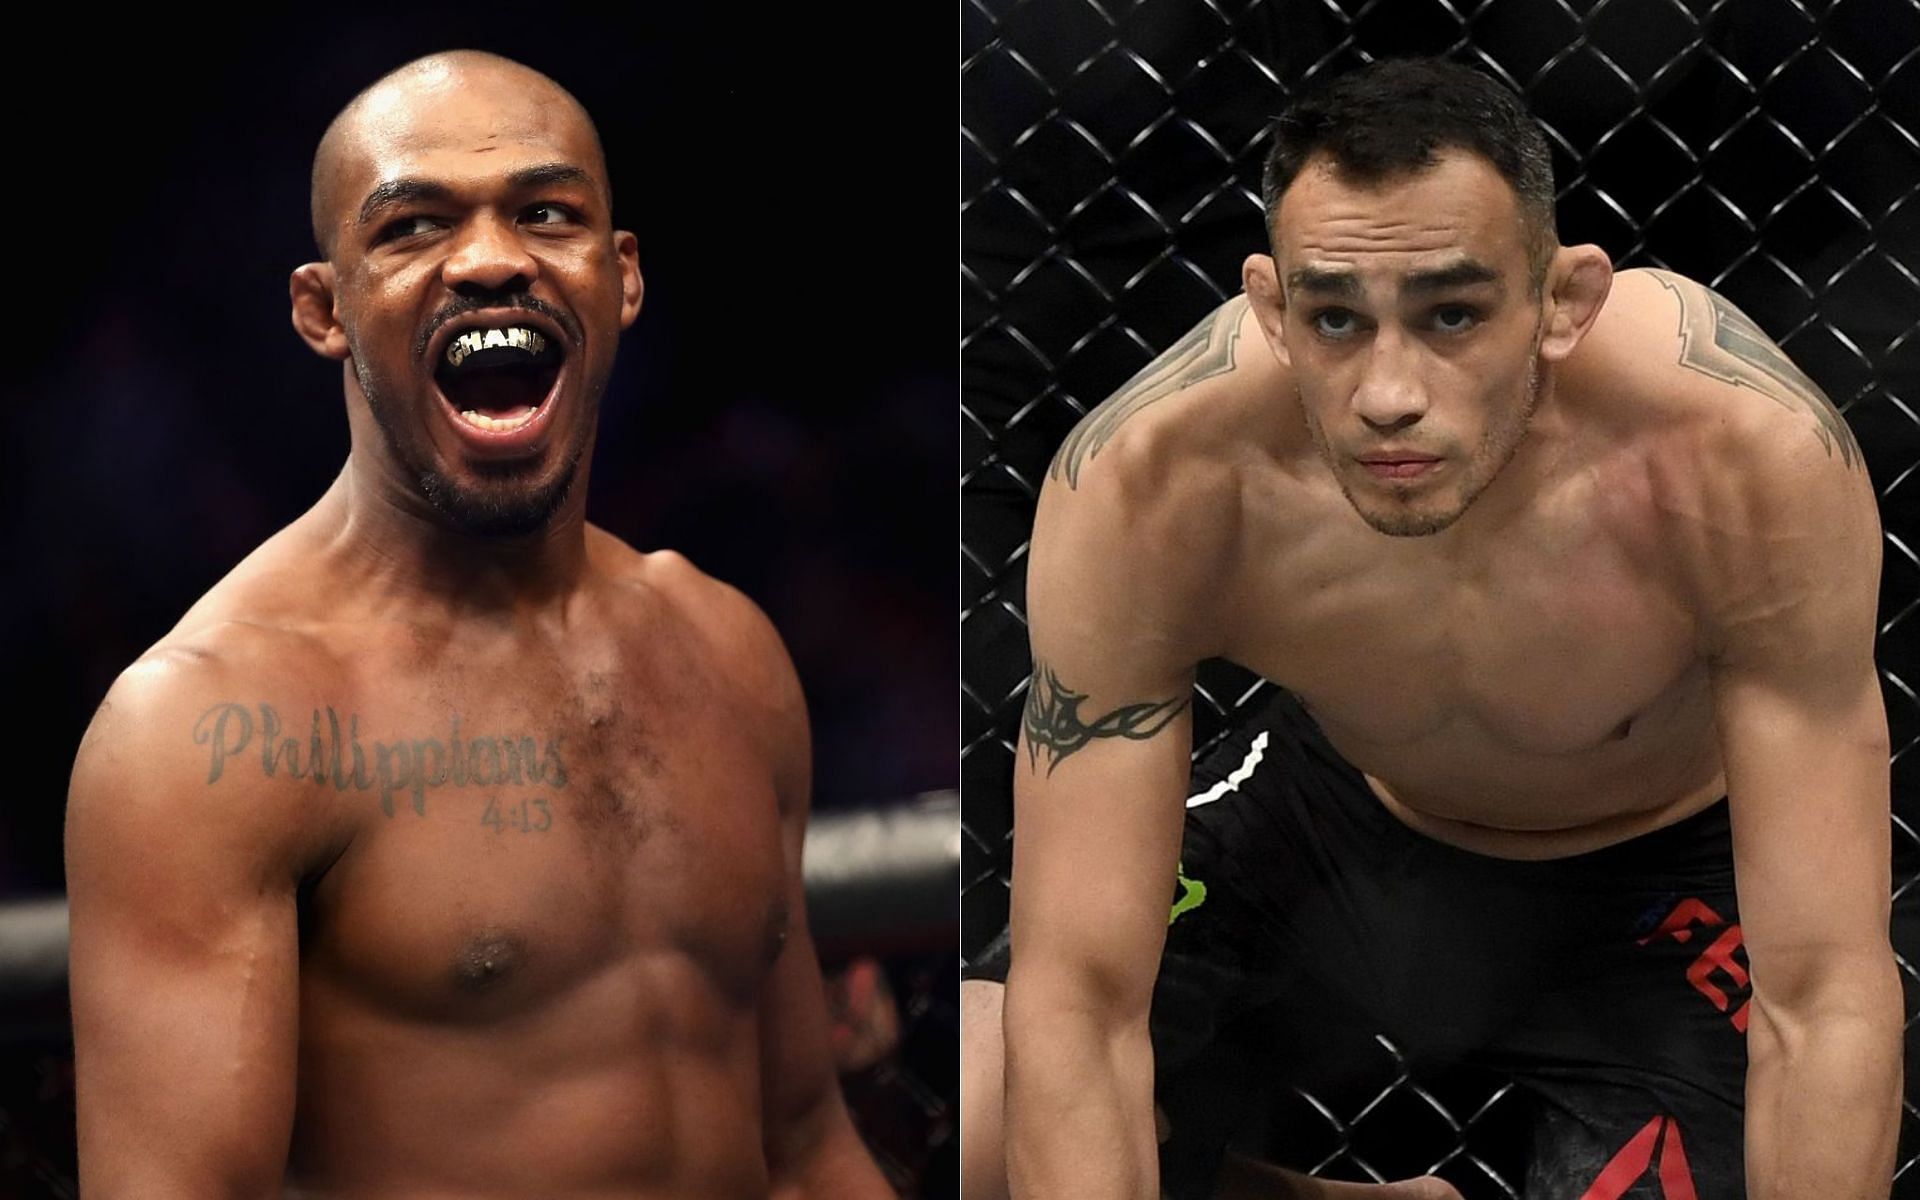 Jon Jones and Tony Ferguson have both found themselves in legal trouble following DUI arrests